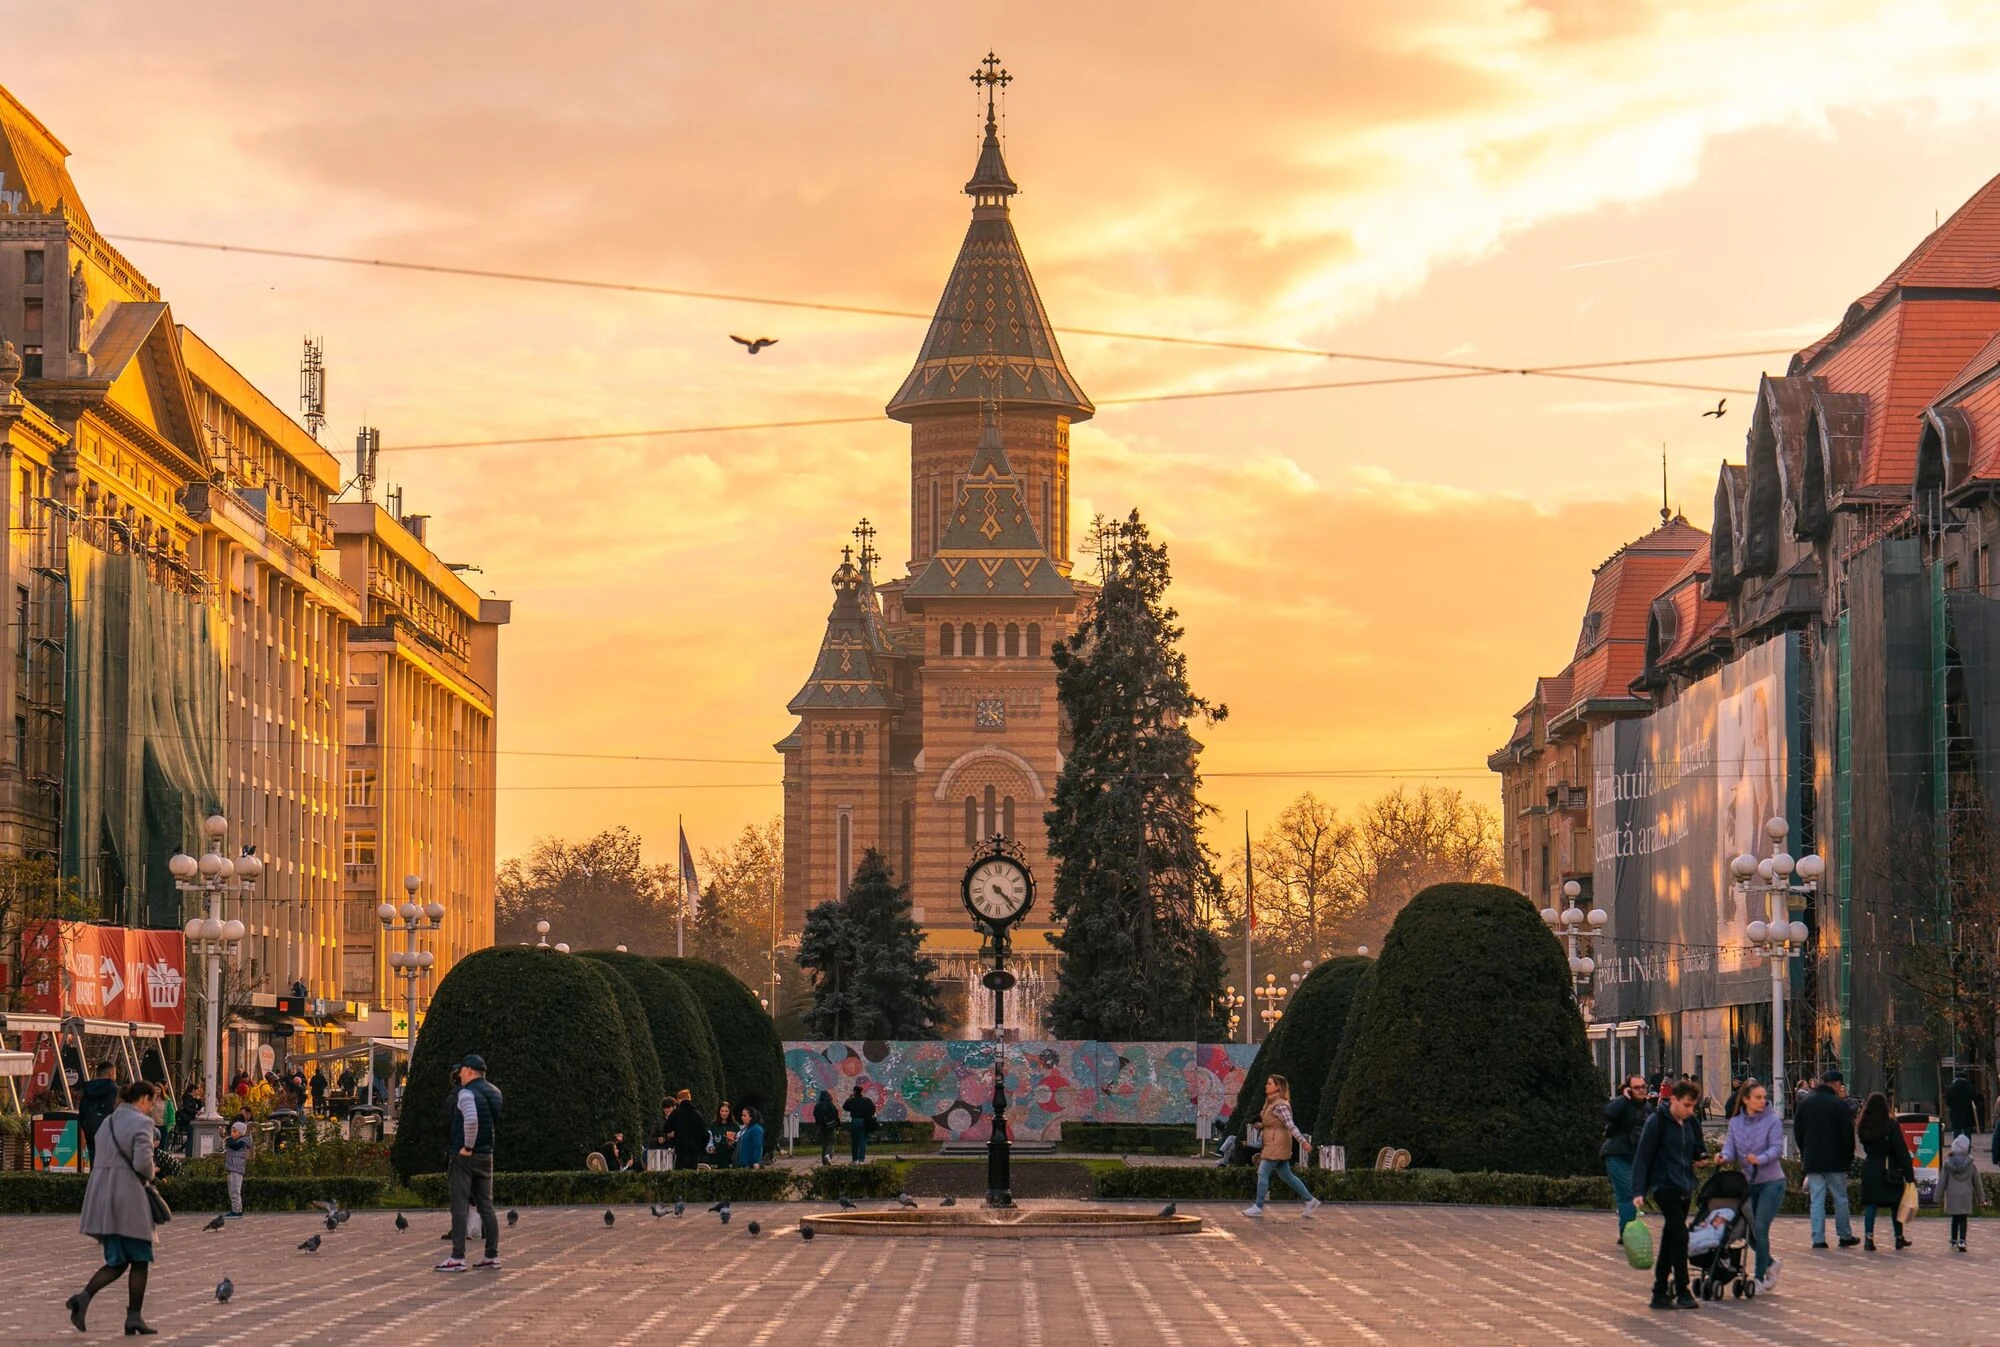 10 Awesome Things to Do in Timisoara for First-Timers - A Complete Guide to Backpacking Timisoara